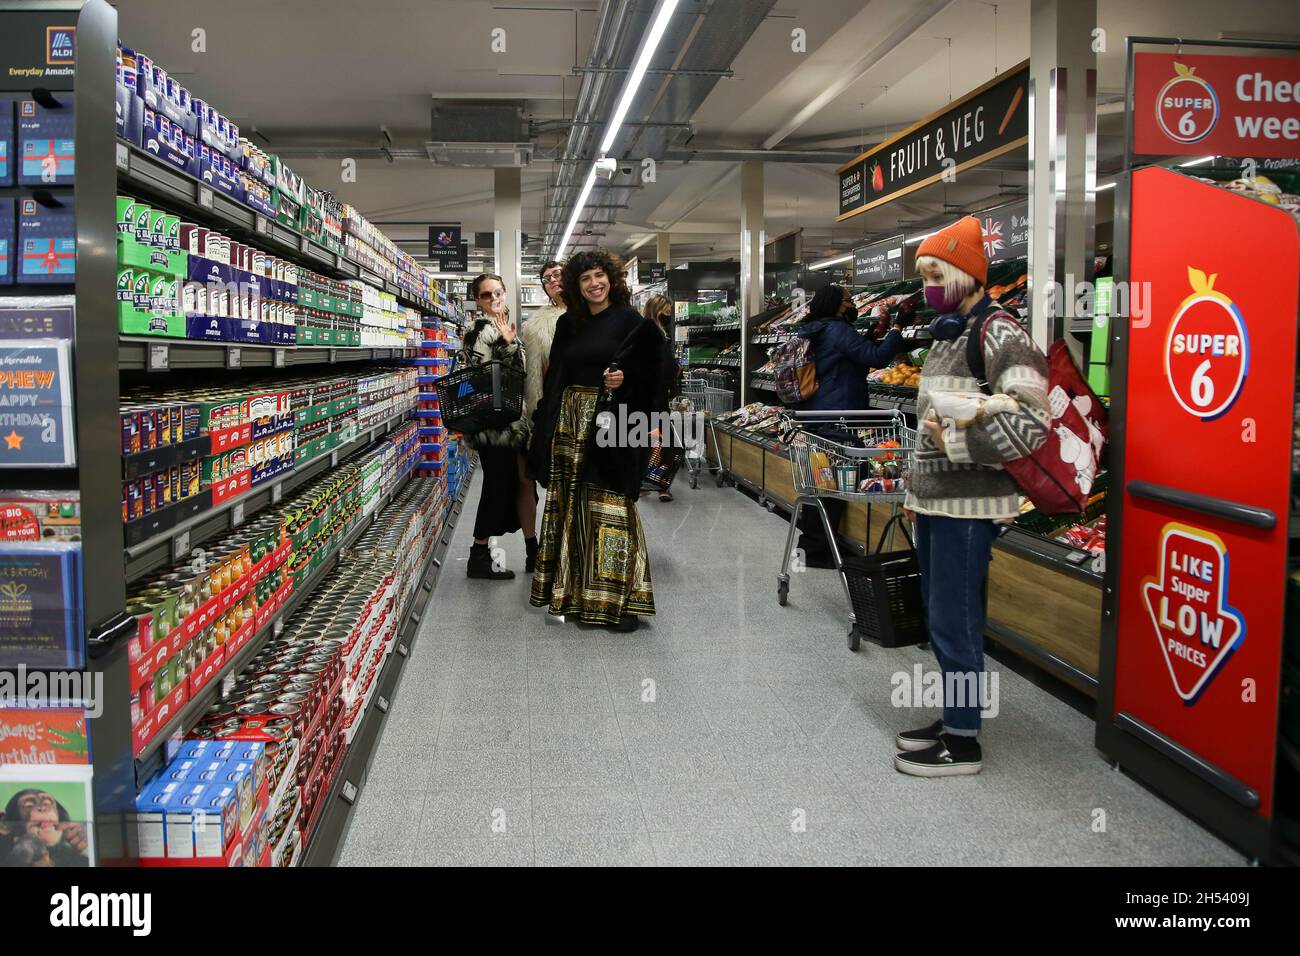 London, UK. 28th Oct, 2021. Shoppers are seen in Aldi supermarket.  According to research from Which?, Aldi has been named as the cheapest  supermarket in the UK for the second month running,